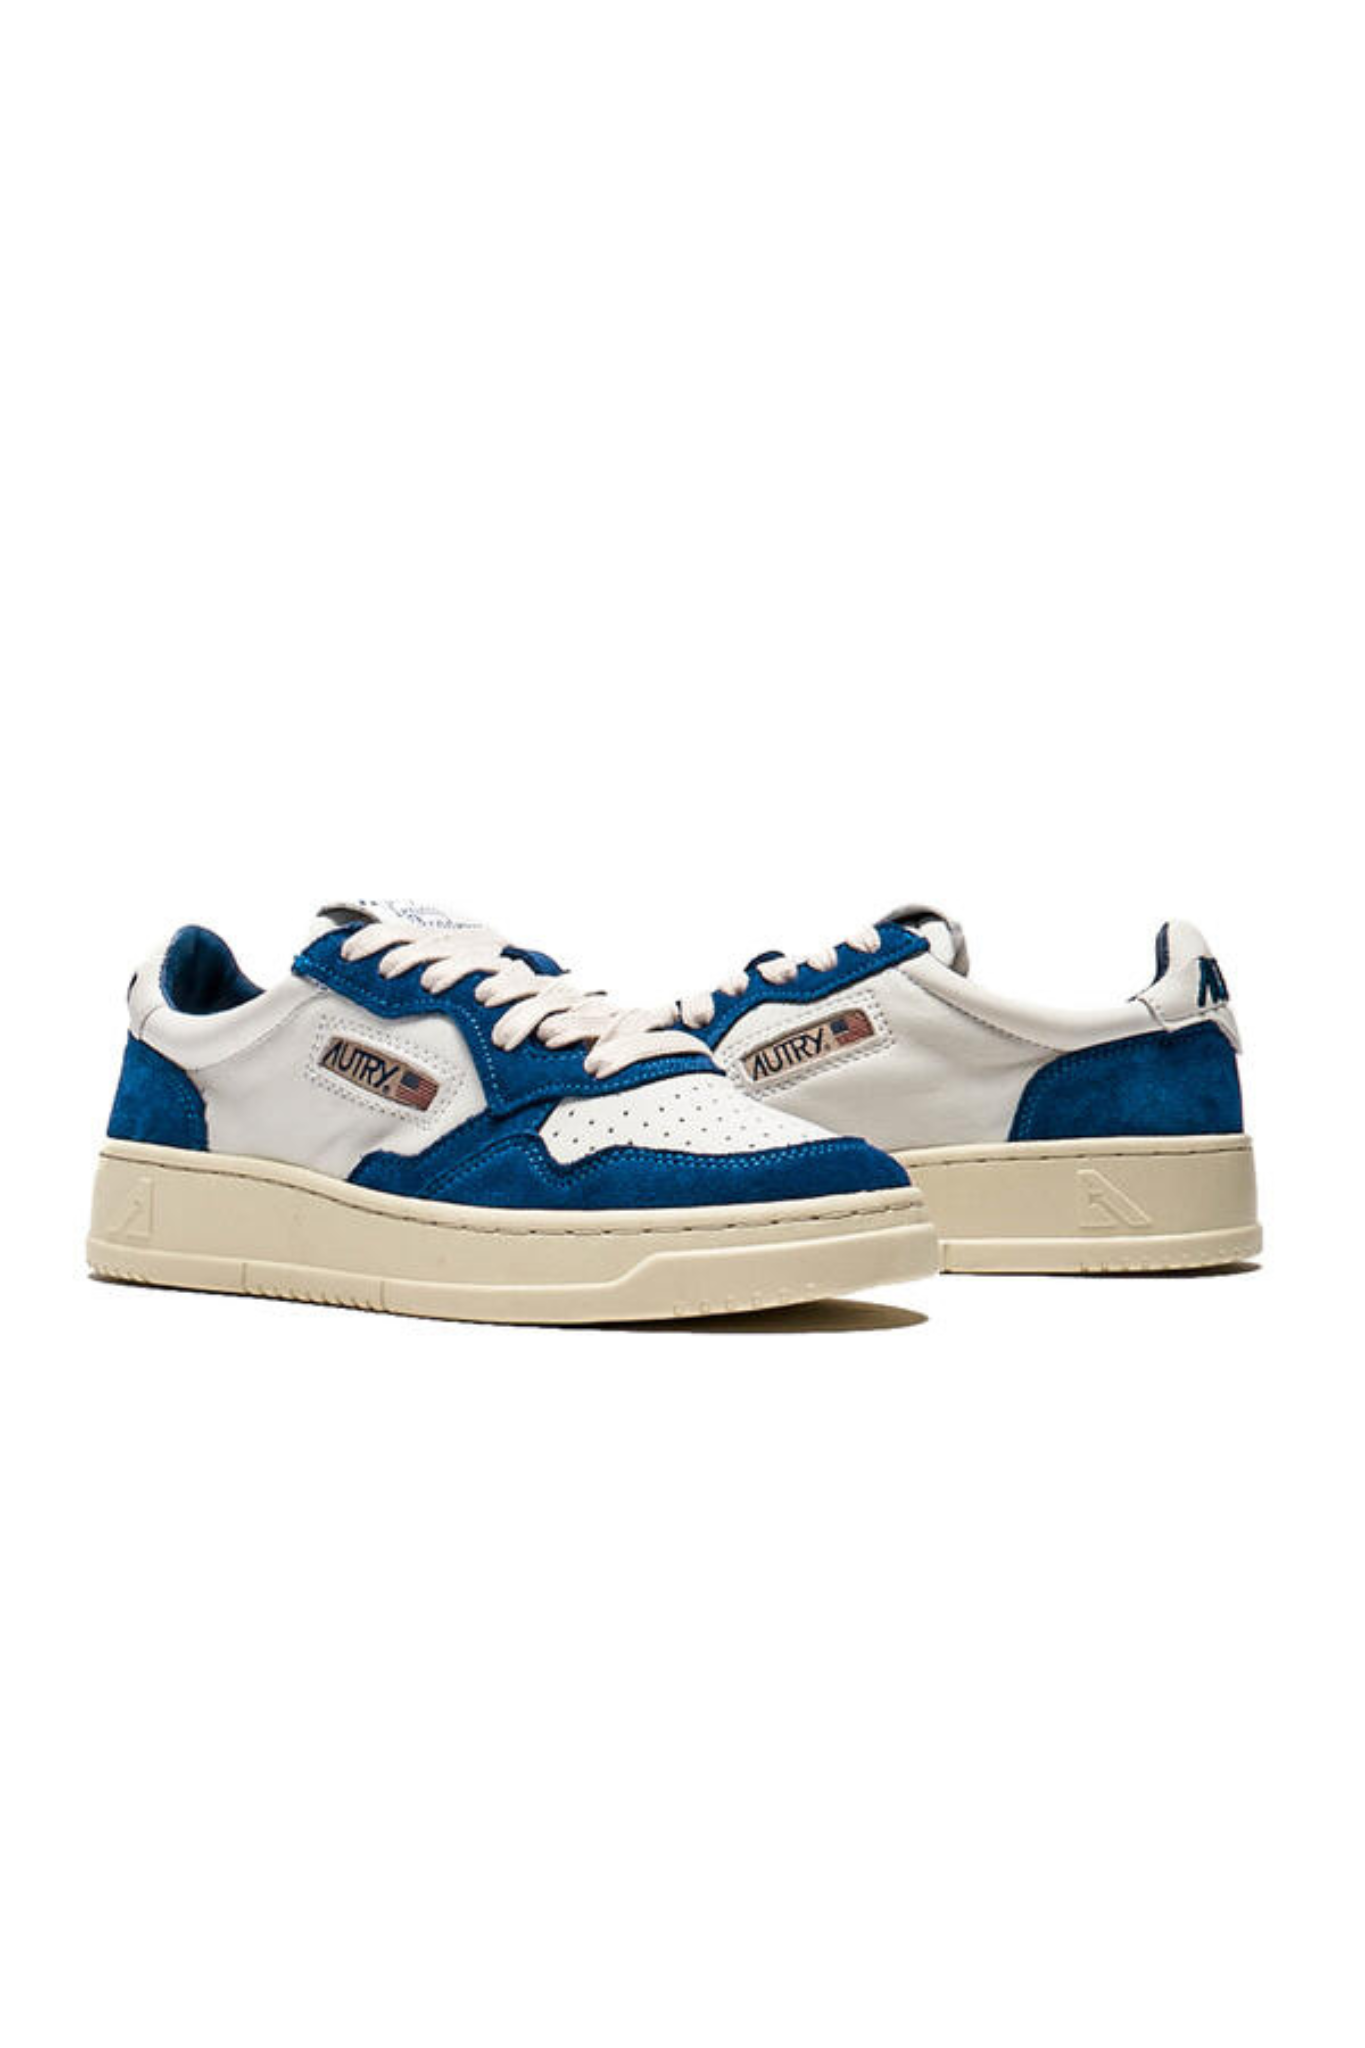 AOLM-CE16 - OPEN LOW SNEAKERS IN LEATHER AND SUEDE COLOR ACADEMY BLUE